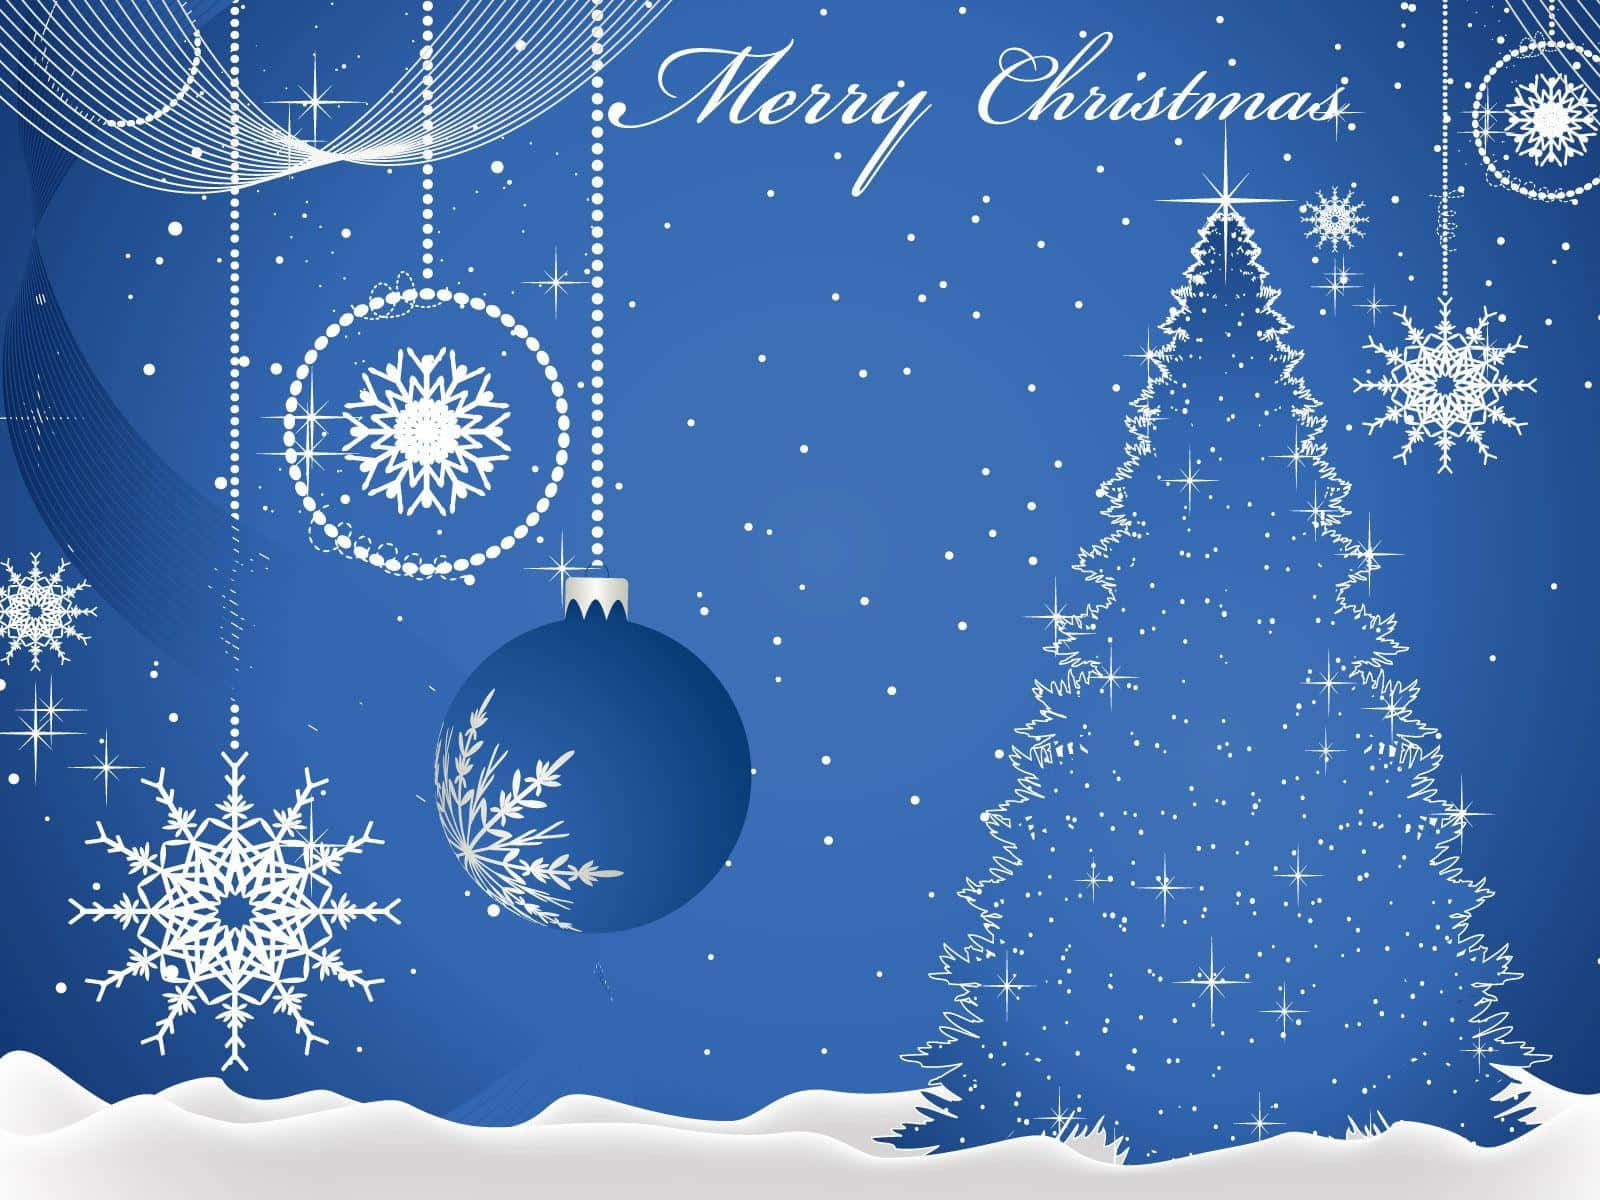 Spread the Christmas cheer with this festive greeting card!